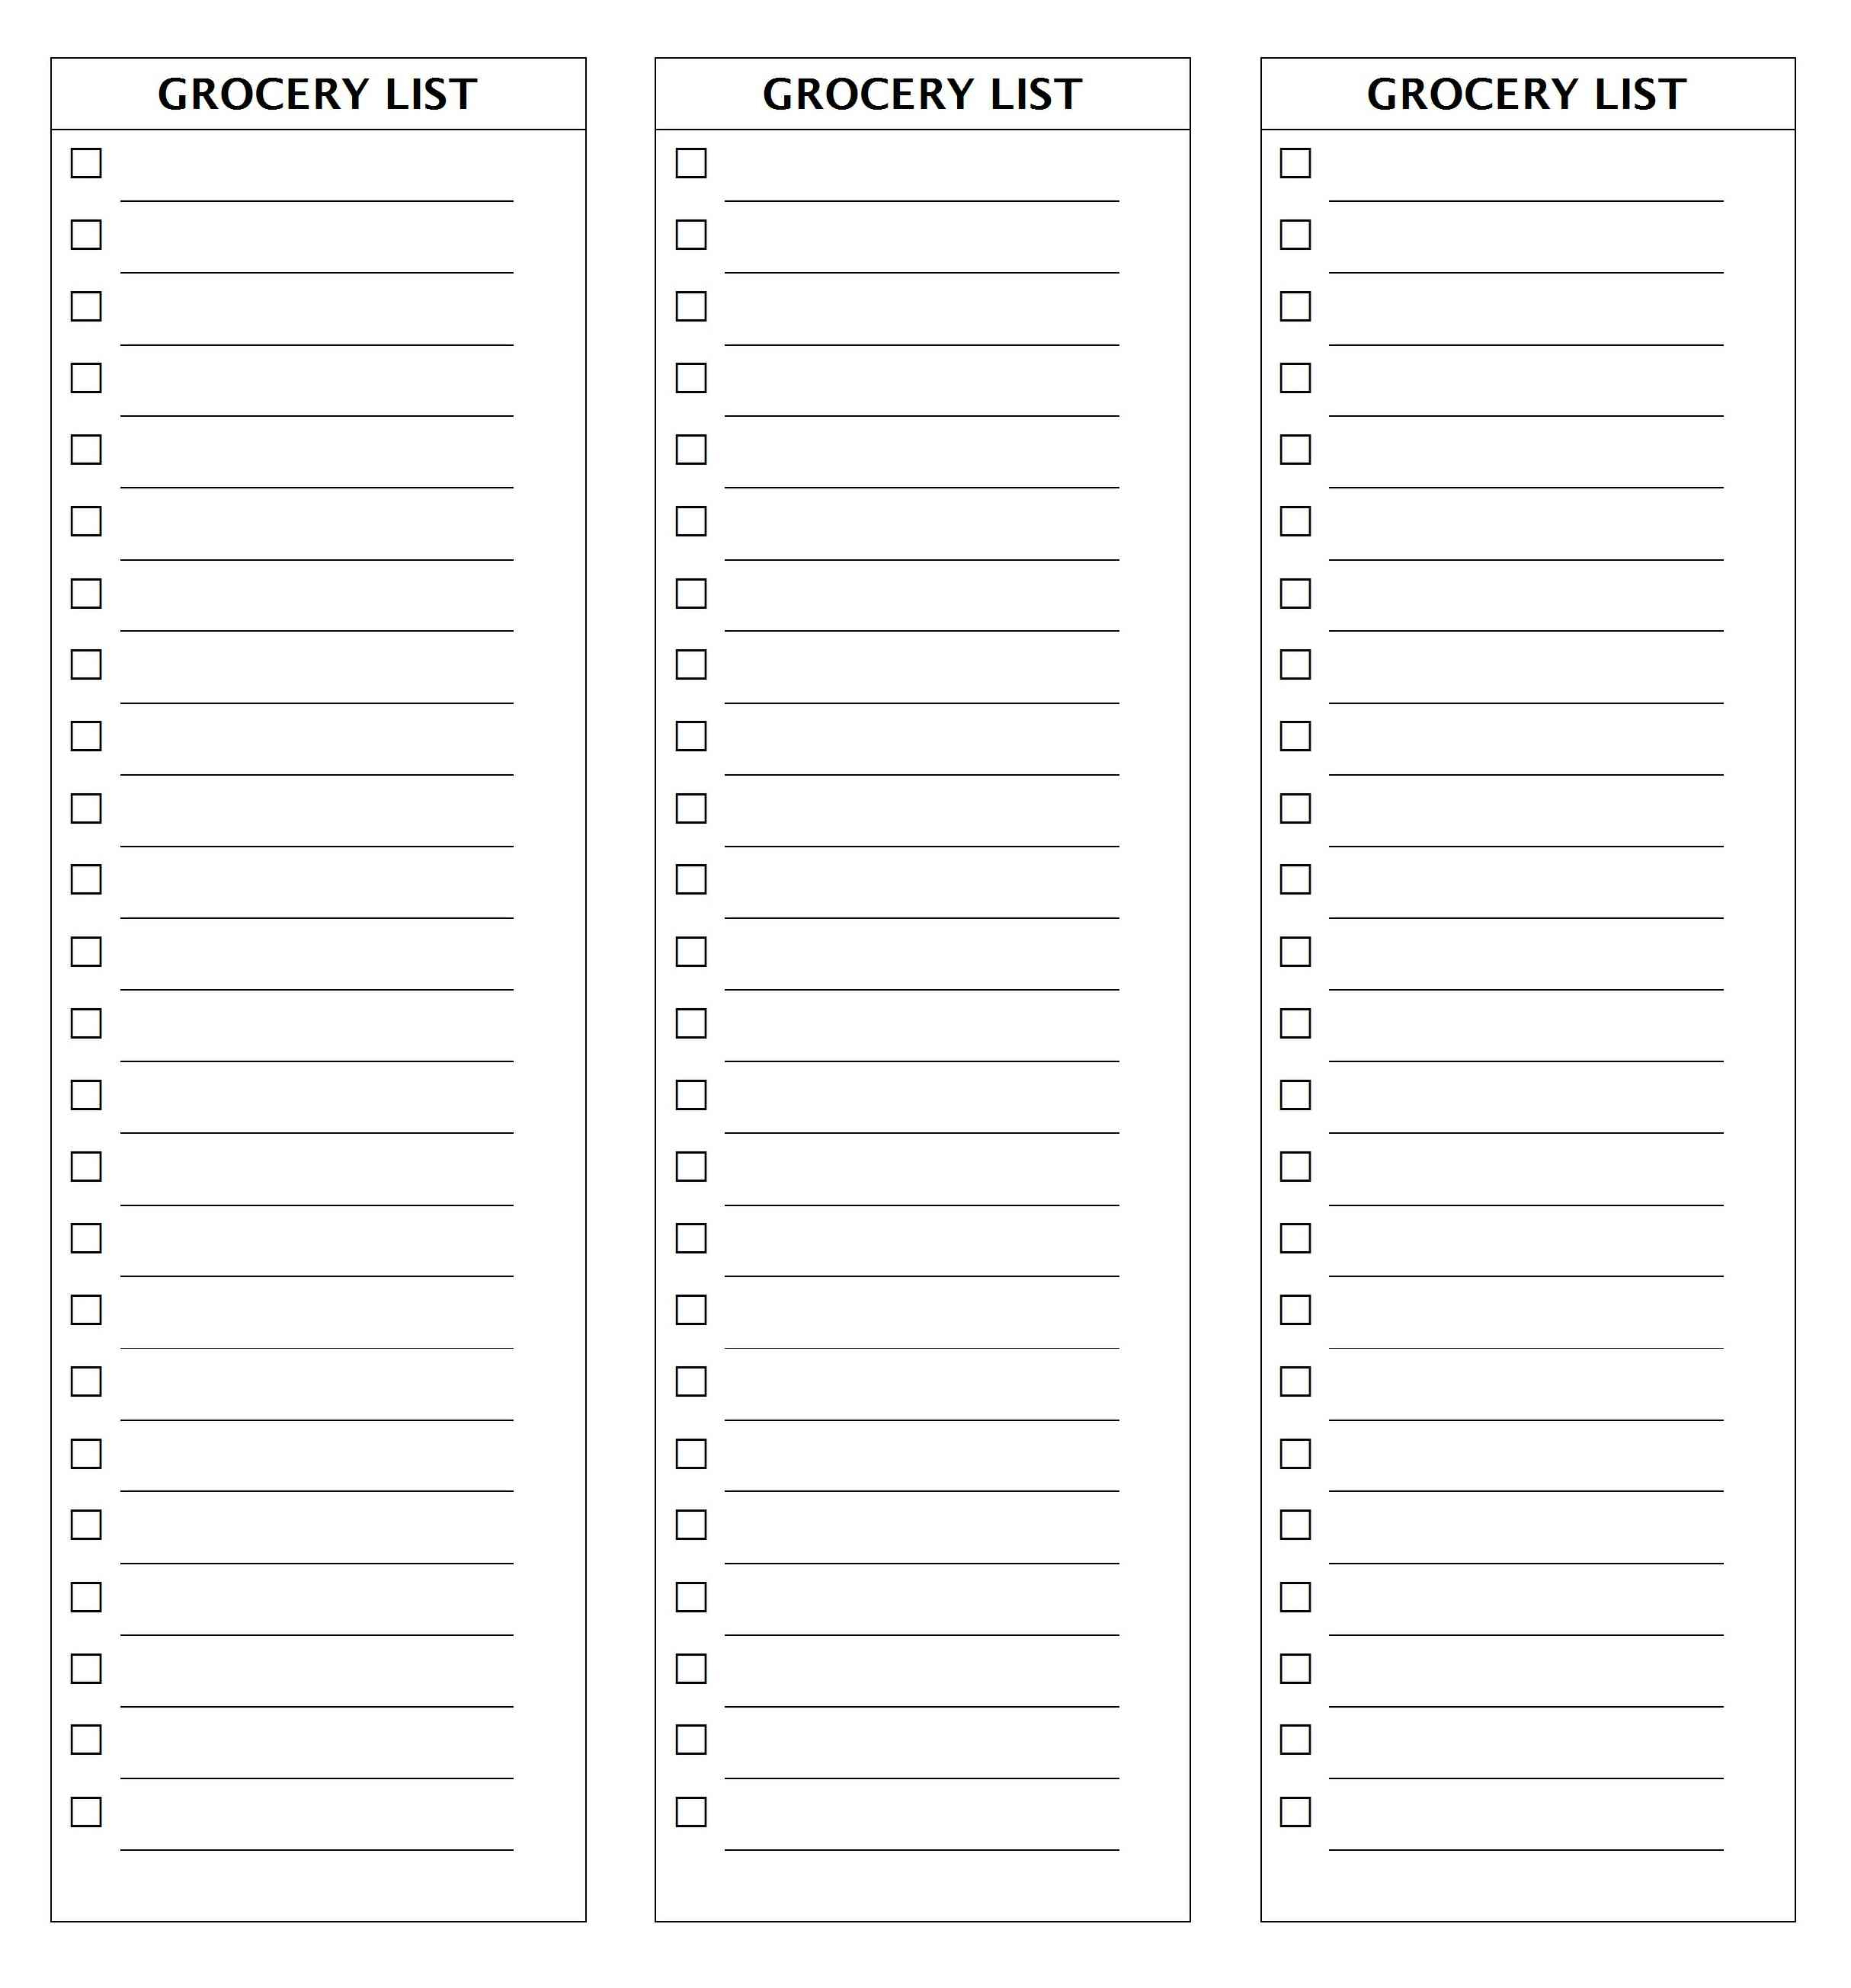 28 Free Printable Grocery List Templates | Kittybabylove - Free Printable Shopping List